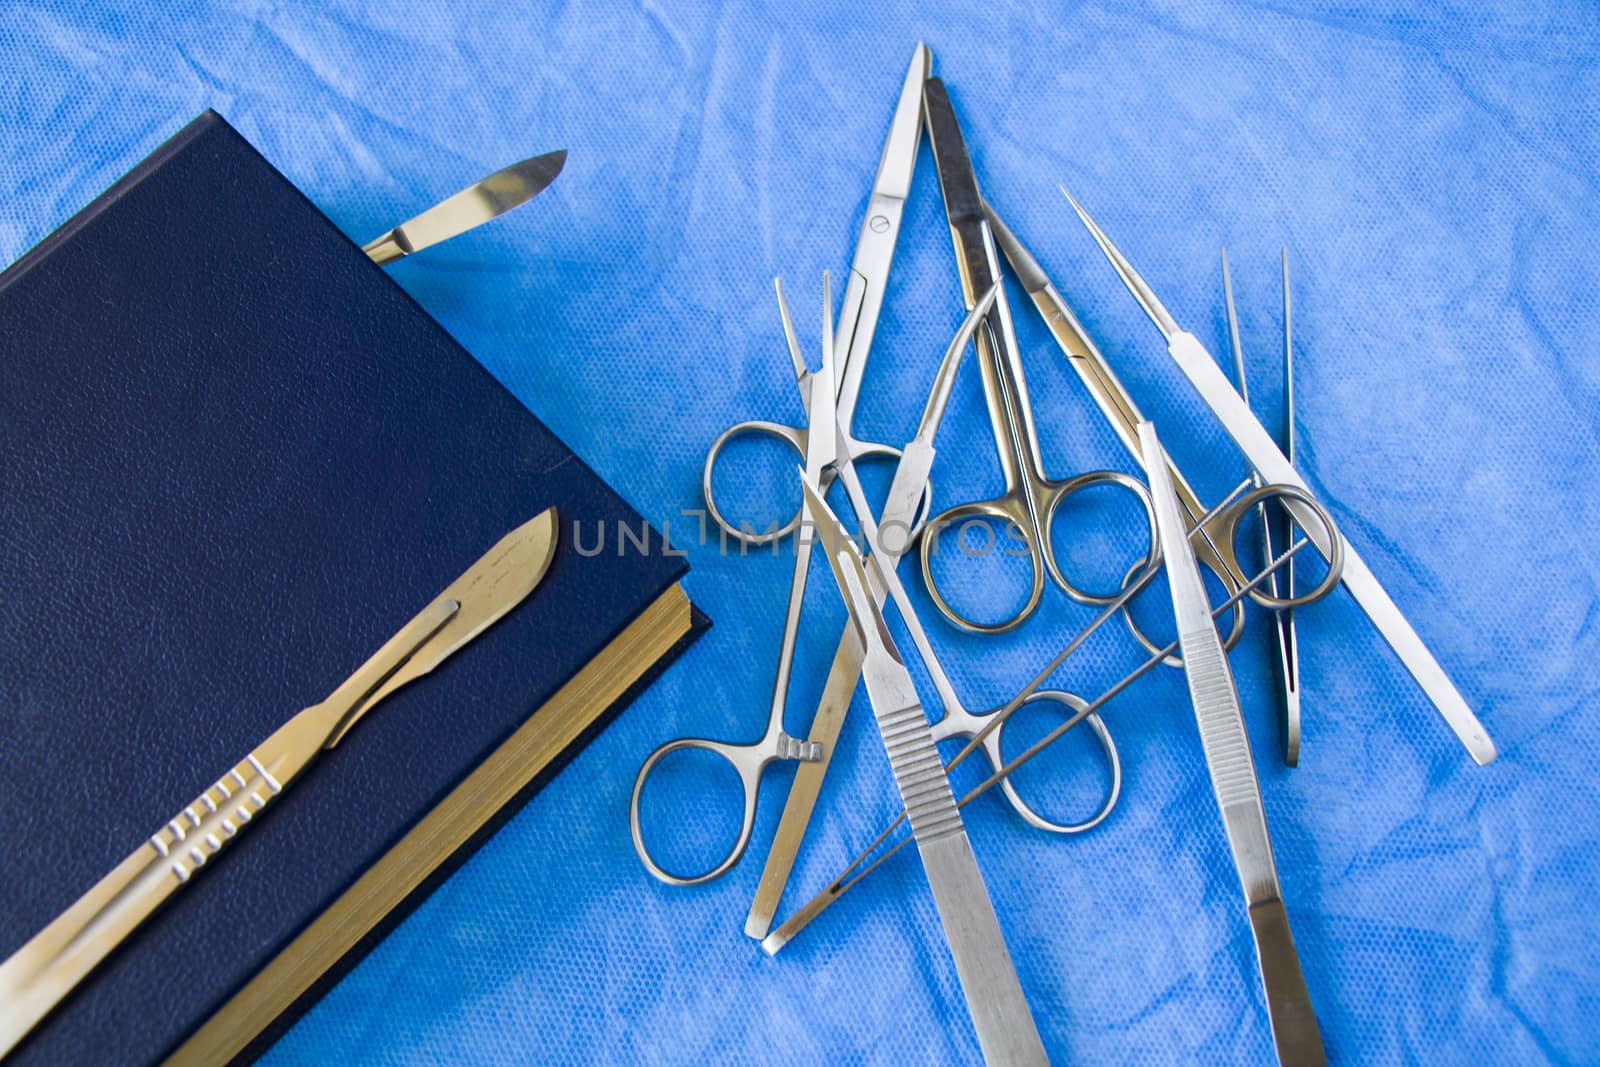 Dissection Kit - Stainless Steel Tools for Medical Students of Anatomy, Biology, Veterinary and learning book by Taidundua